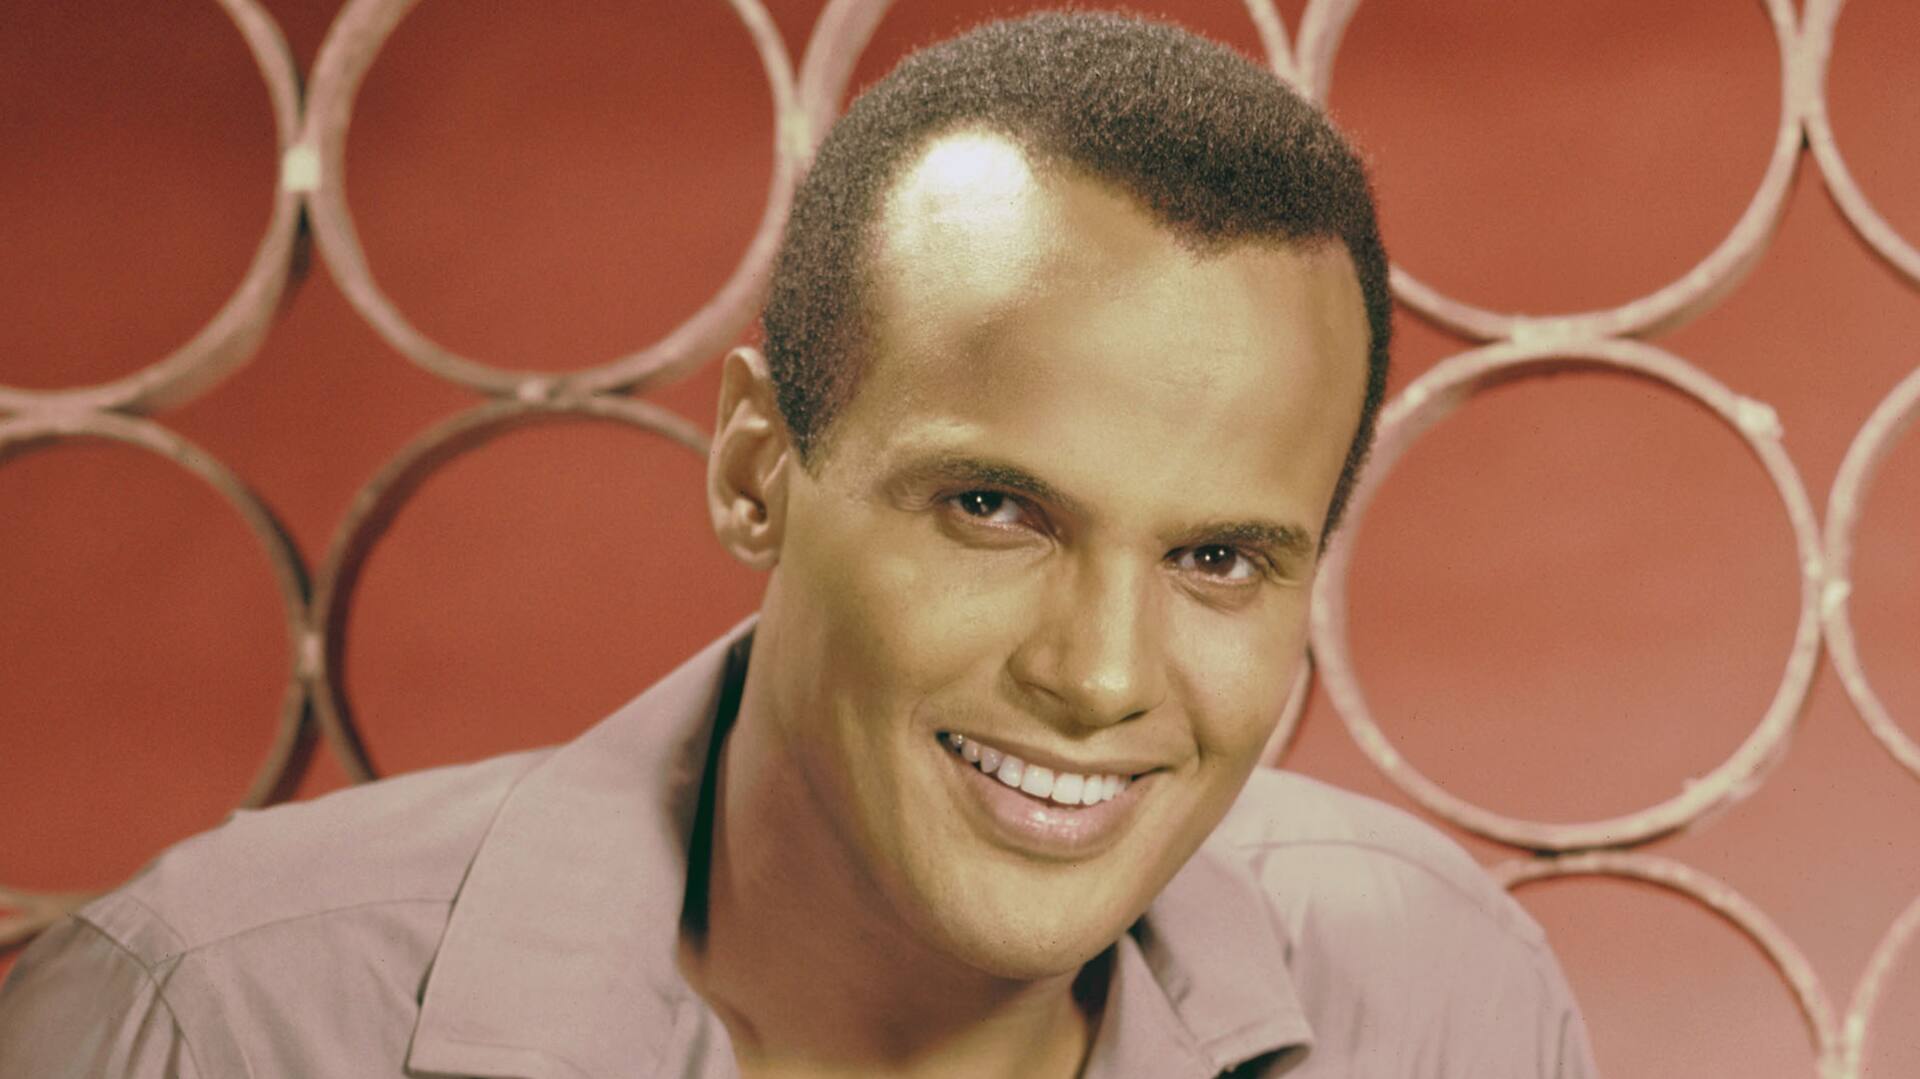 Remembering legendary artist-activist Harry Belafonte, who passed away at 96